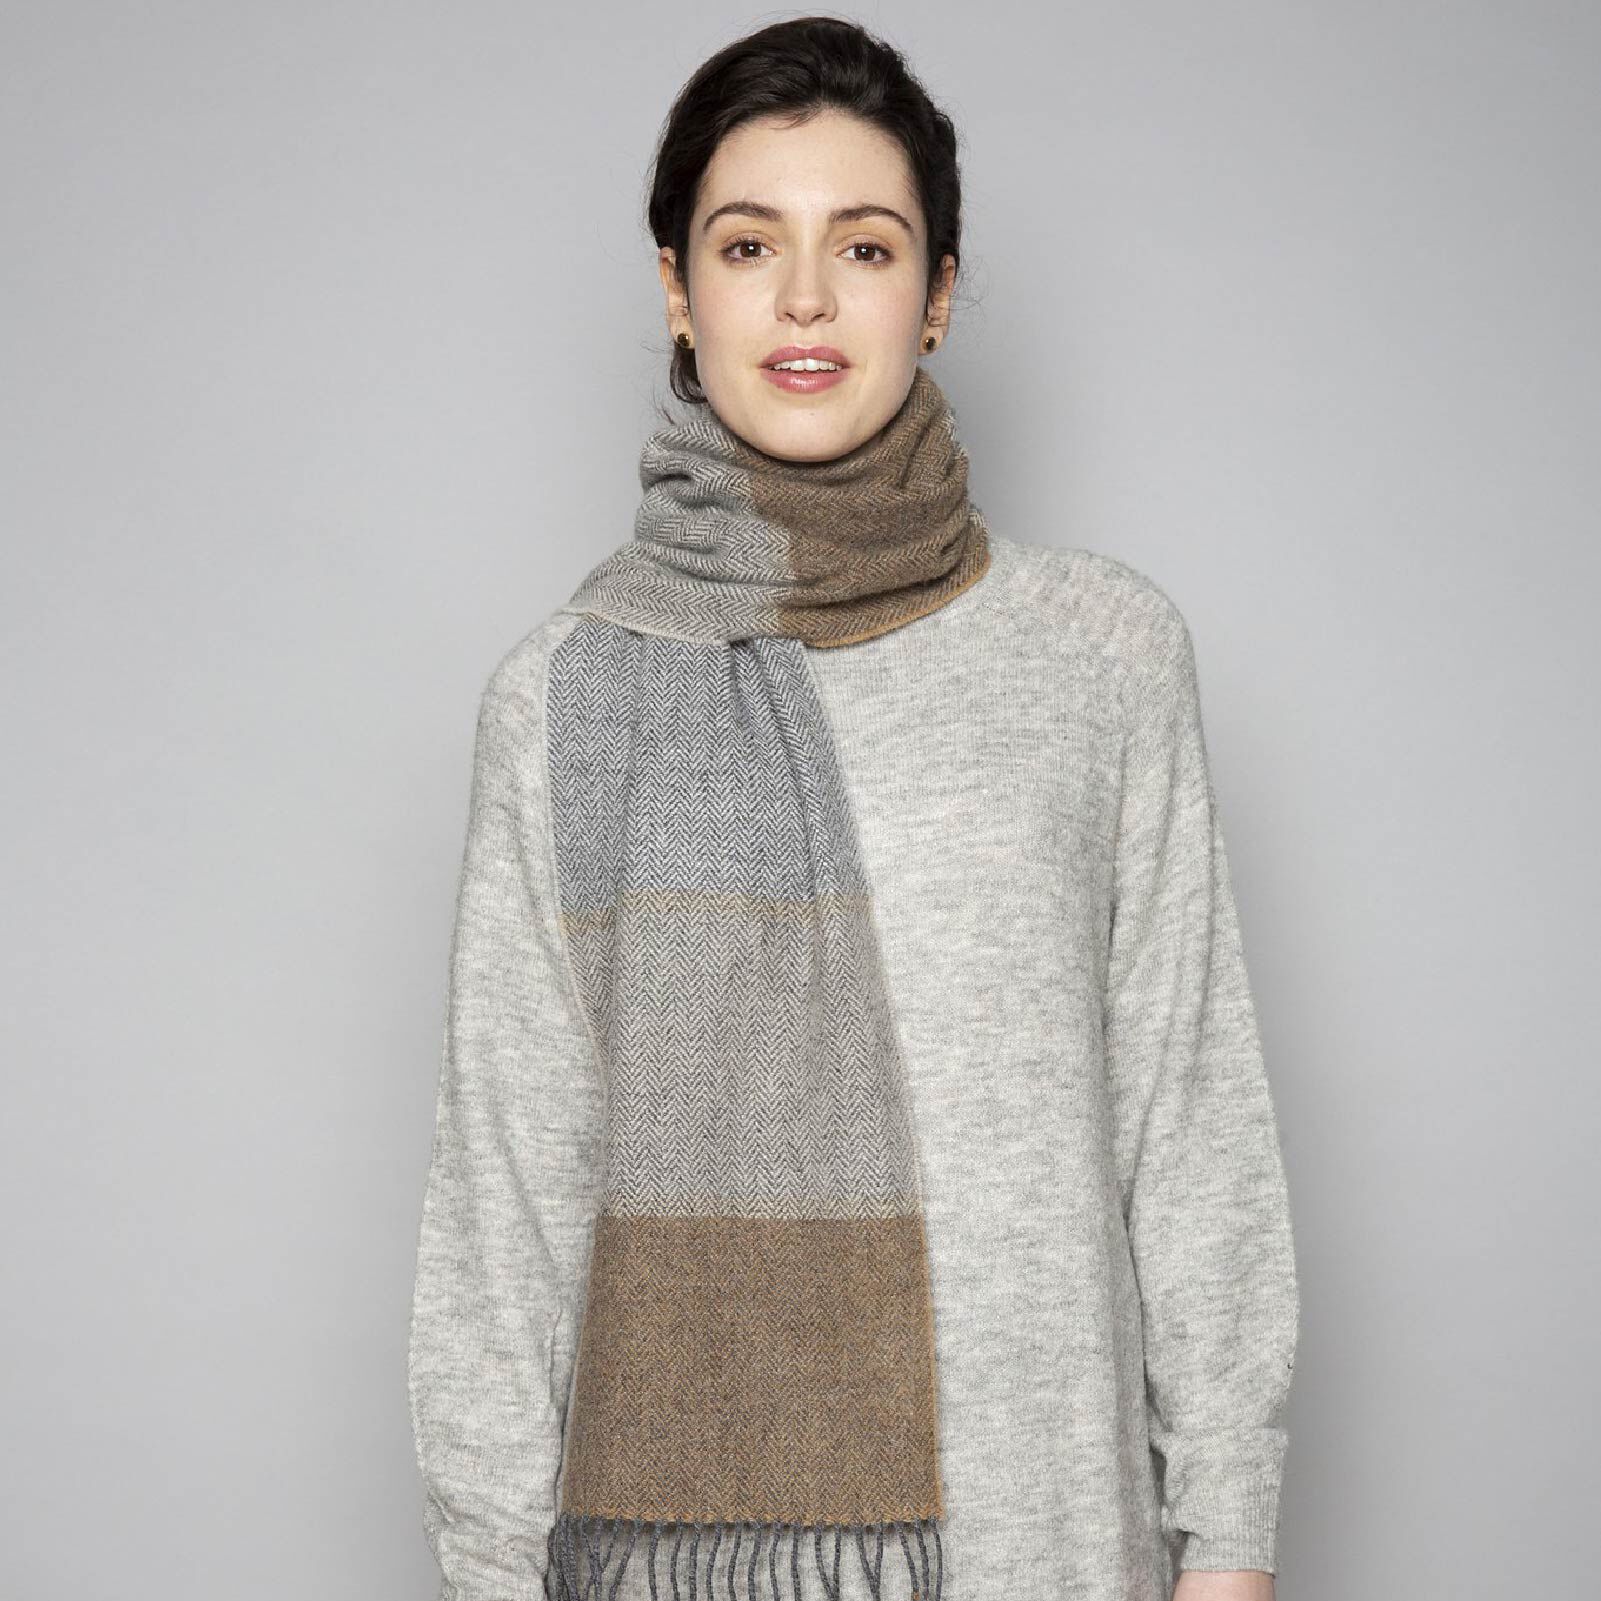 Shrug shoulders Normal Outboard Buy Foxford Classic Woollen Scarf With Rolled Fringe Grey/Camel Colour |  Carrolls Irish Gifts